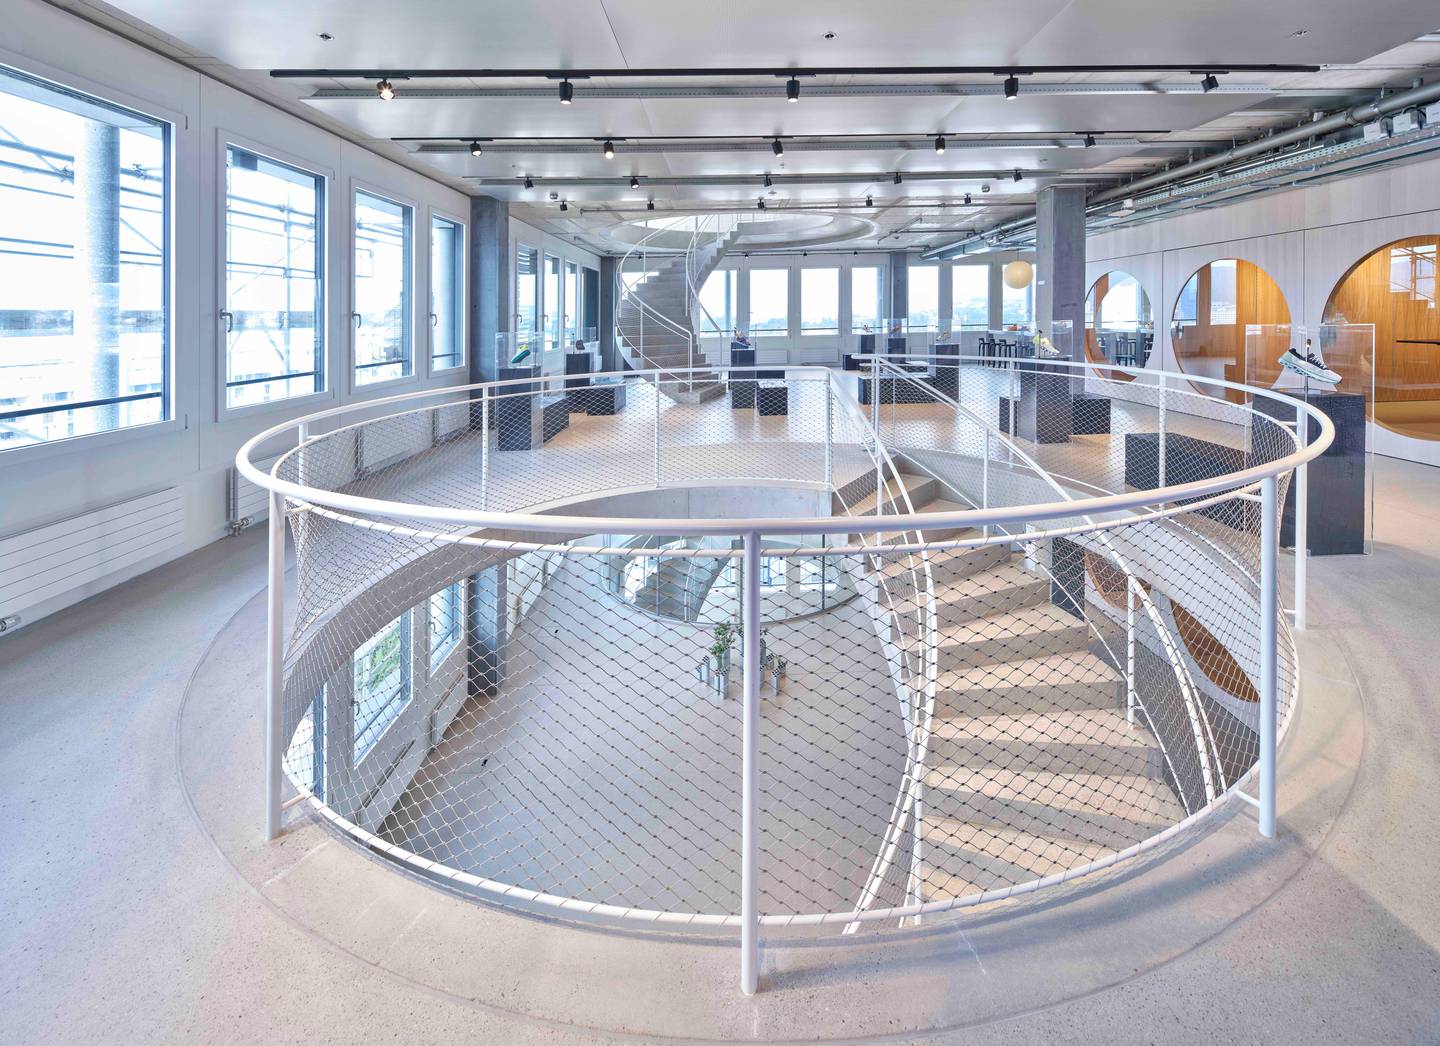 Zurich, Switzerland-based running shoe brand On opened a new 17-story office space called Central Staircase earlier this year. "trail."